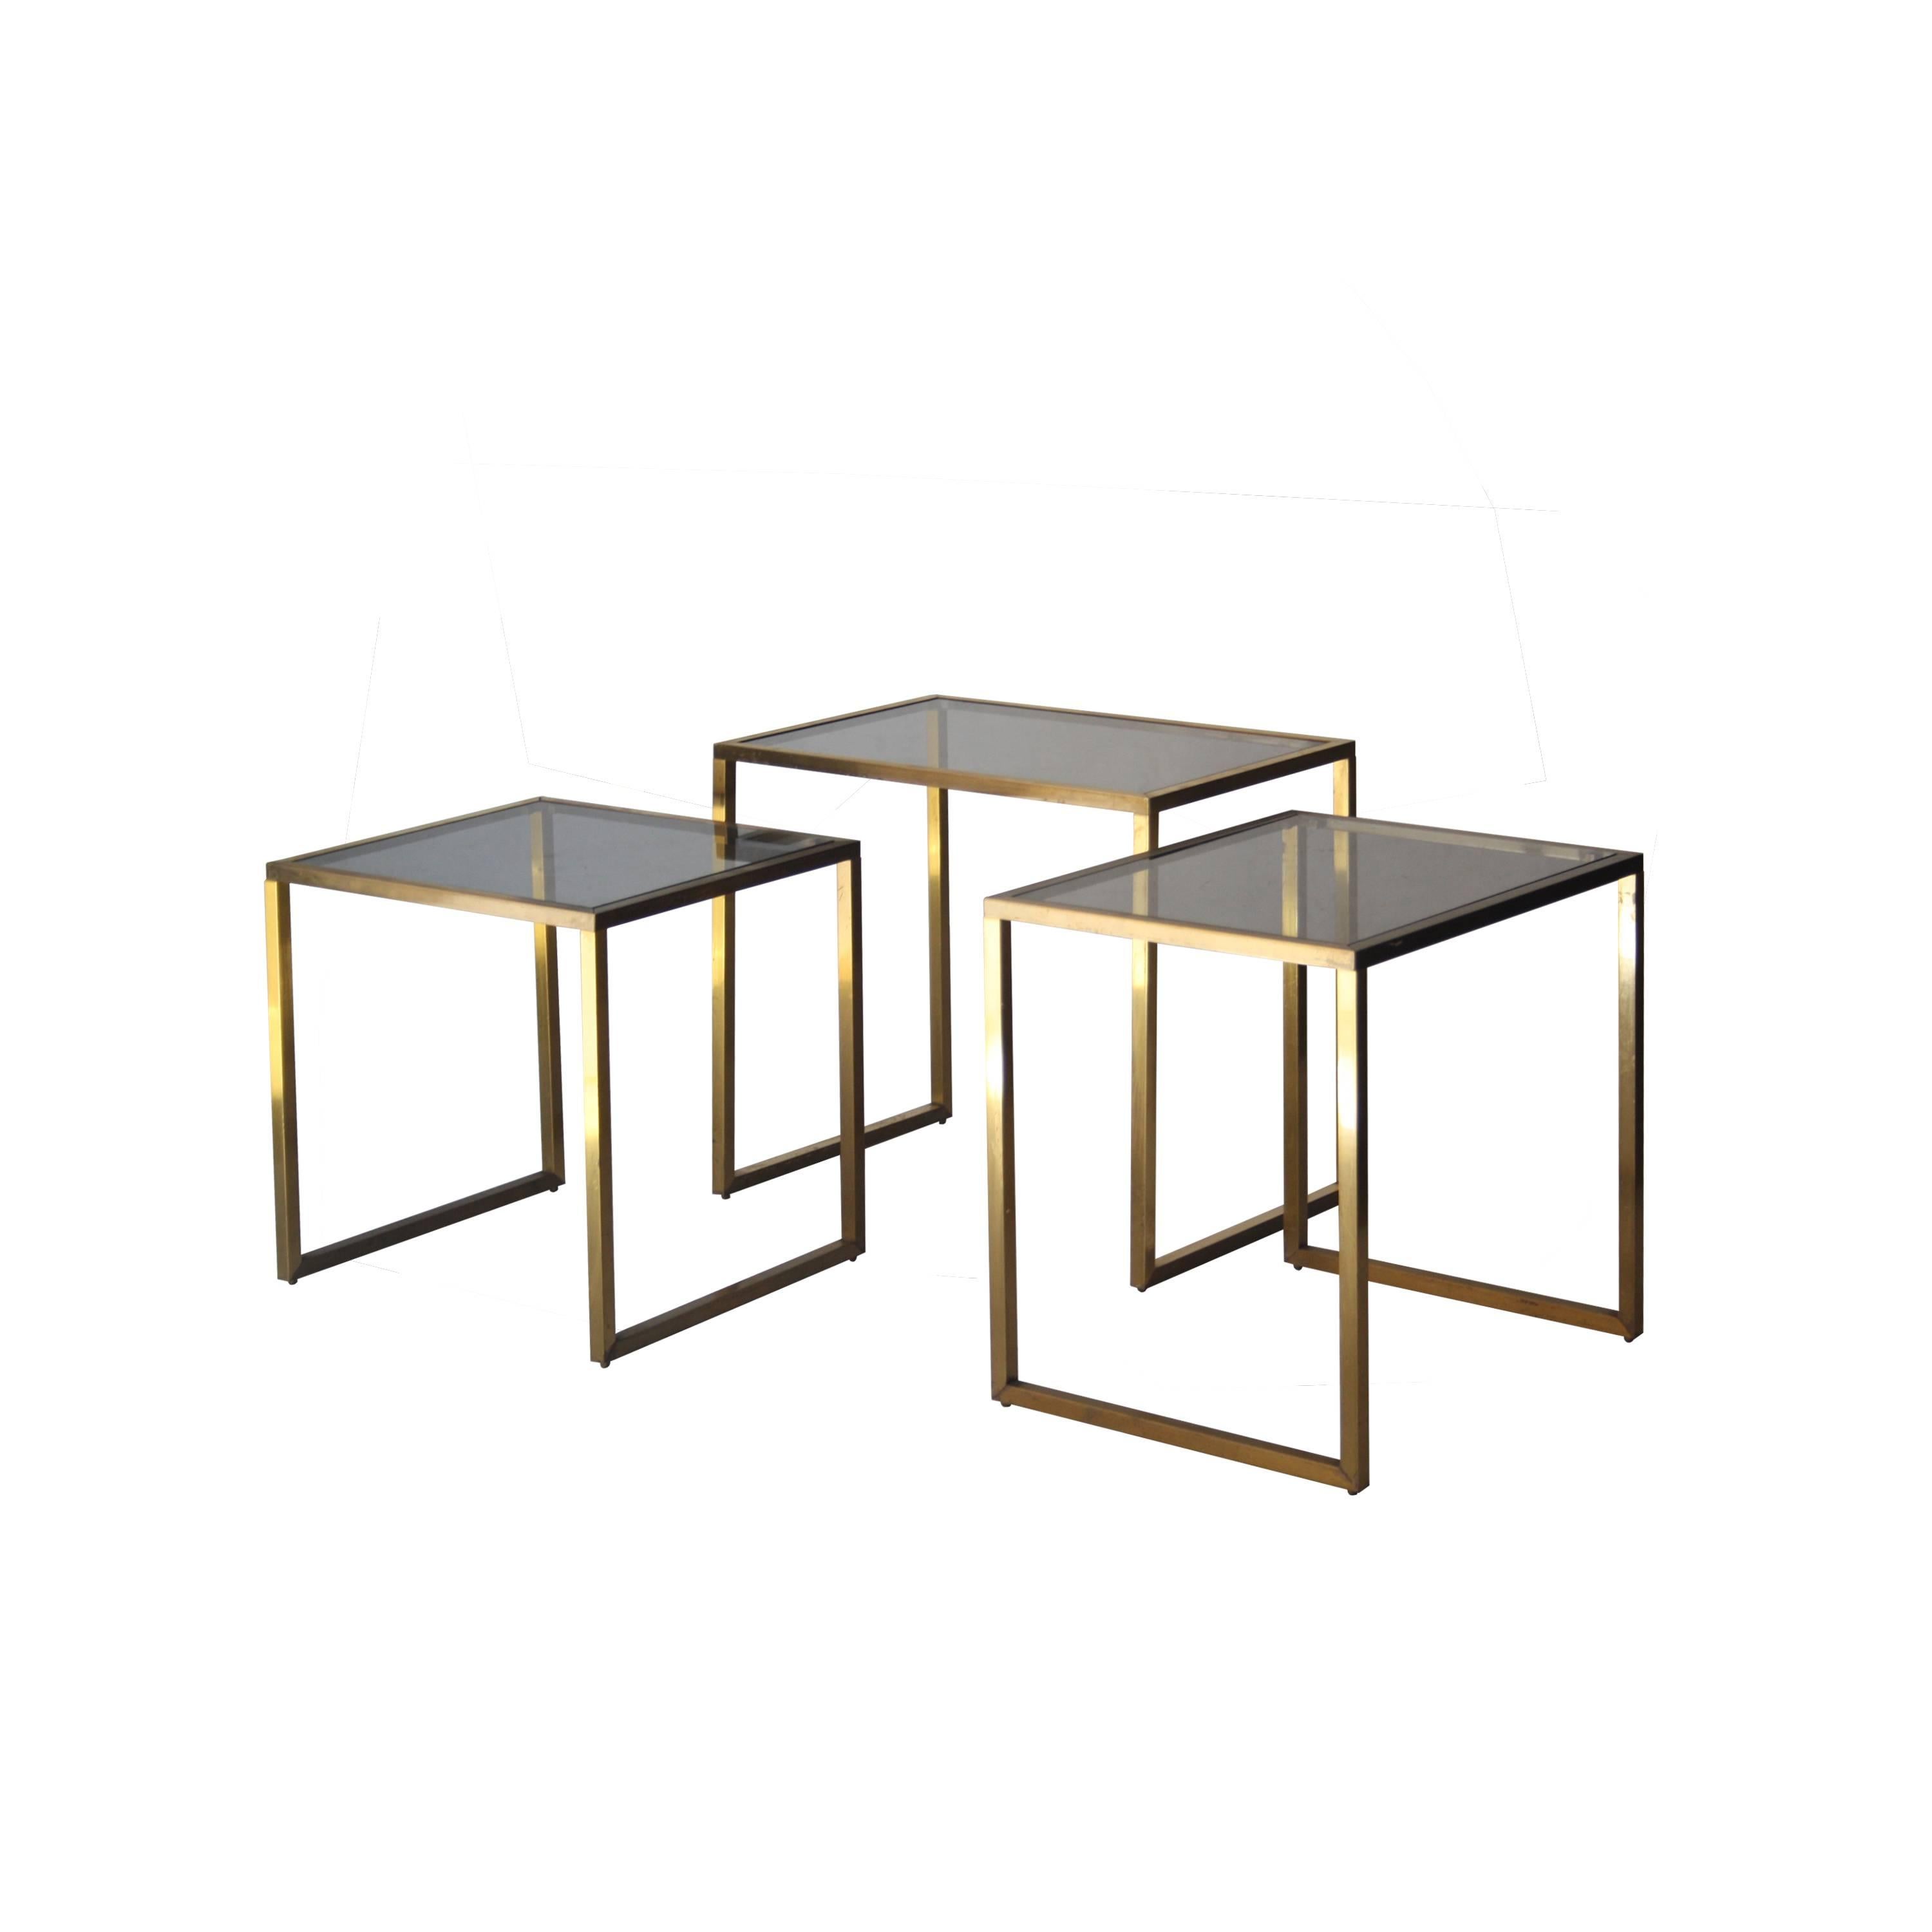 Mid-20th Century Midcentury Modern Rectangular Gold Brass Smoked Glass French Side Tables, 1960